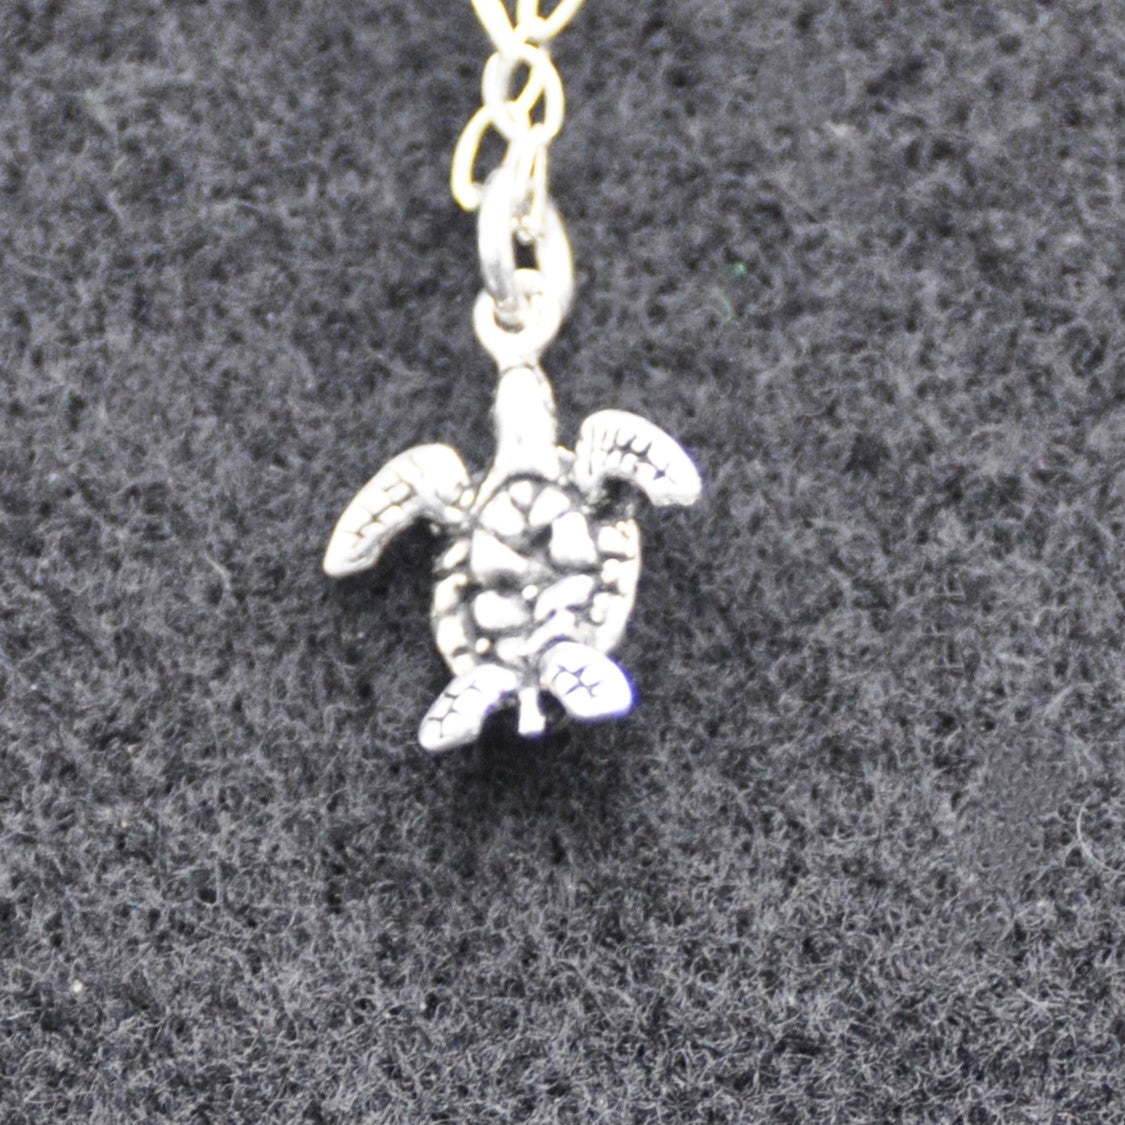 Sea Turtle Pendant Small Recycled Sterling Silver .925 18 Inch Chain Endangered Species